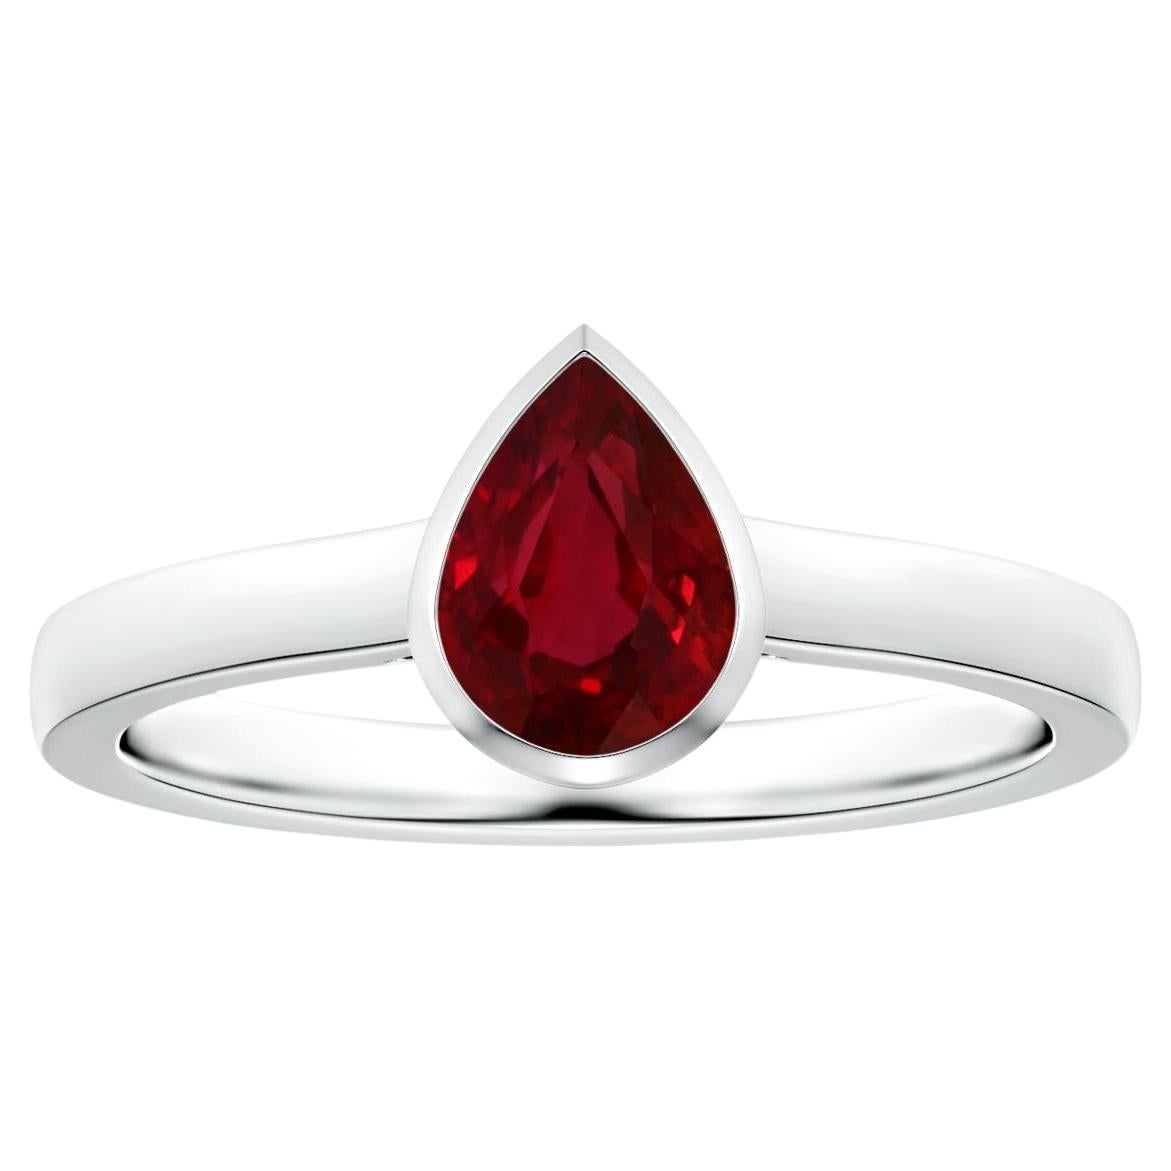 For Sale:  ANGARA Bezel-Set GIA Certified Pear-Shaped Ruby Solitaire Ring in Platinum